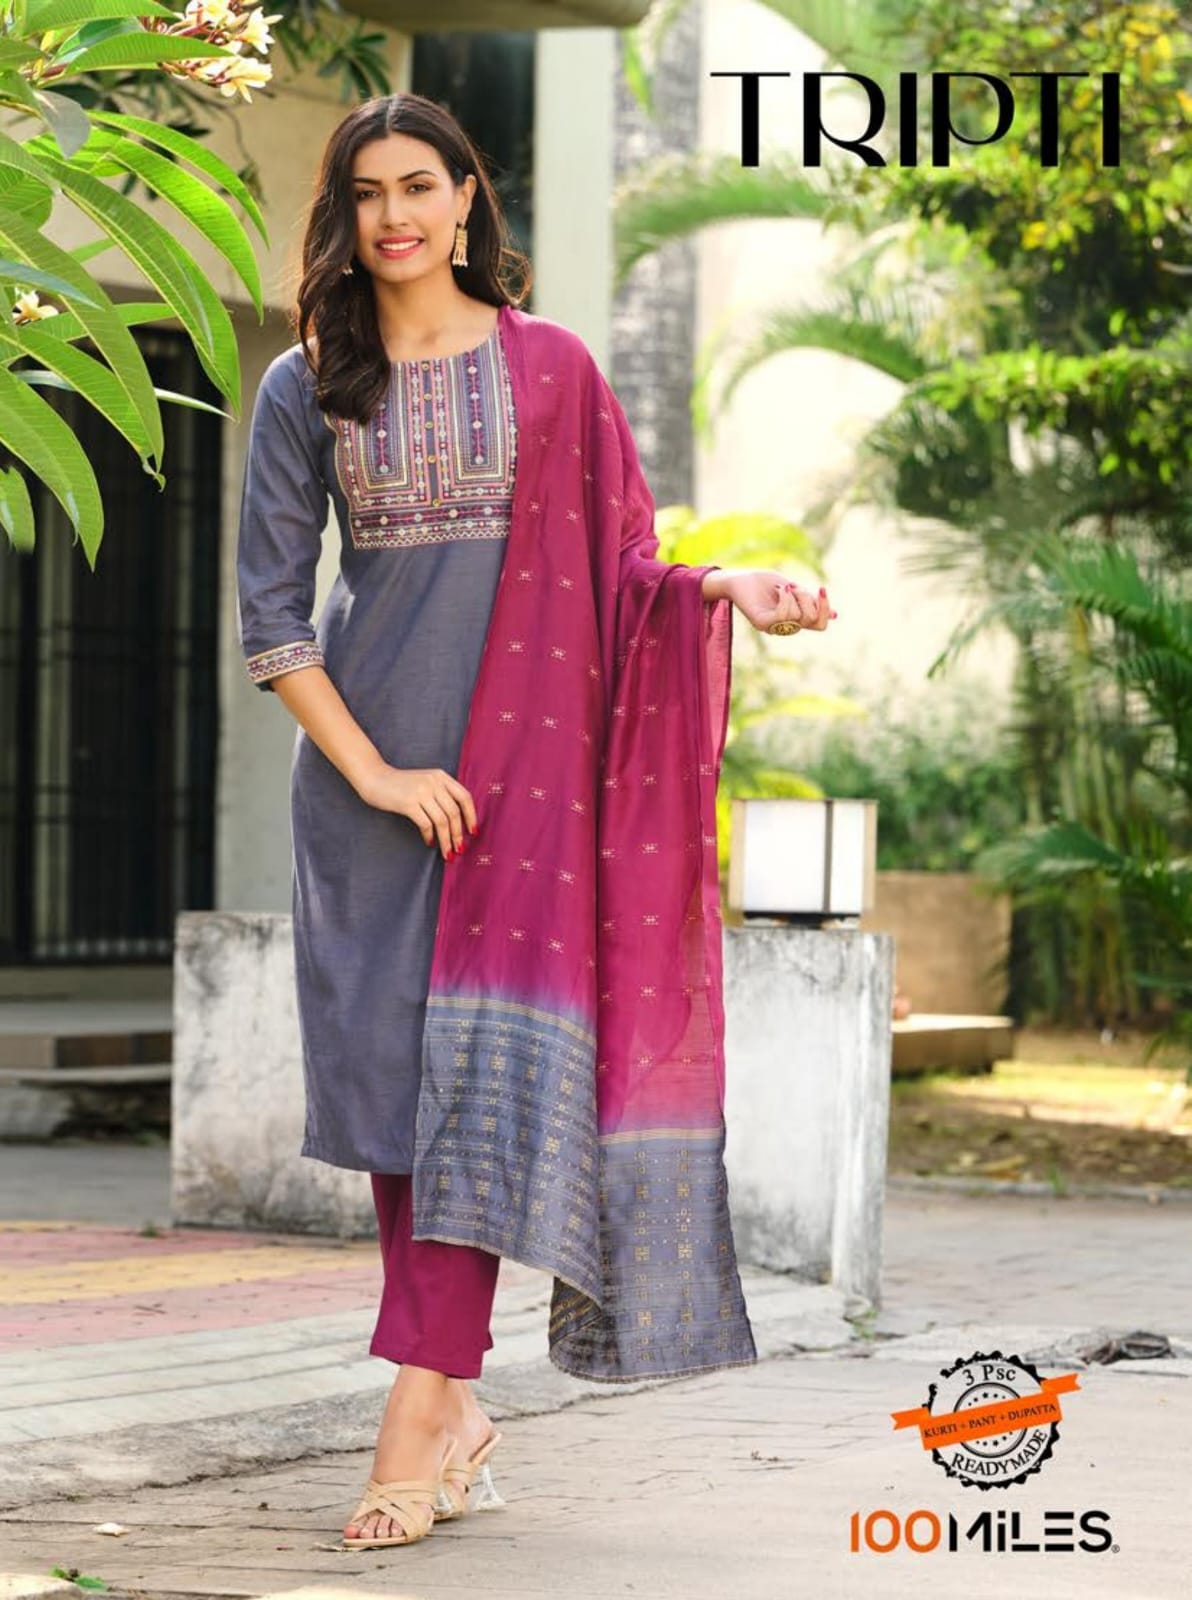 Tripti 100 Miles Readymade Pant Style Suits